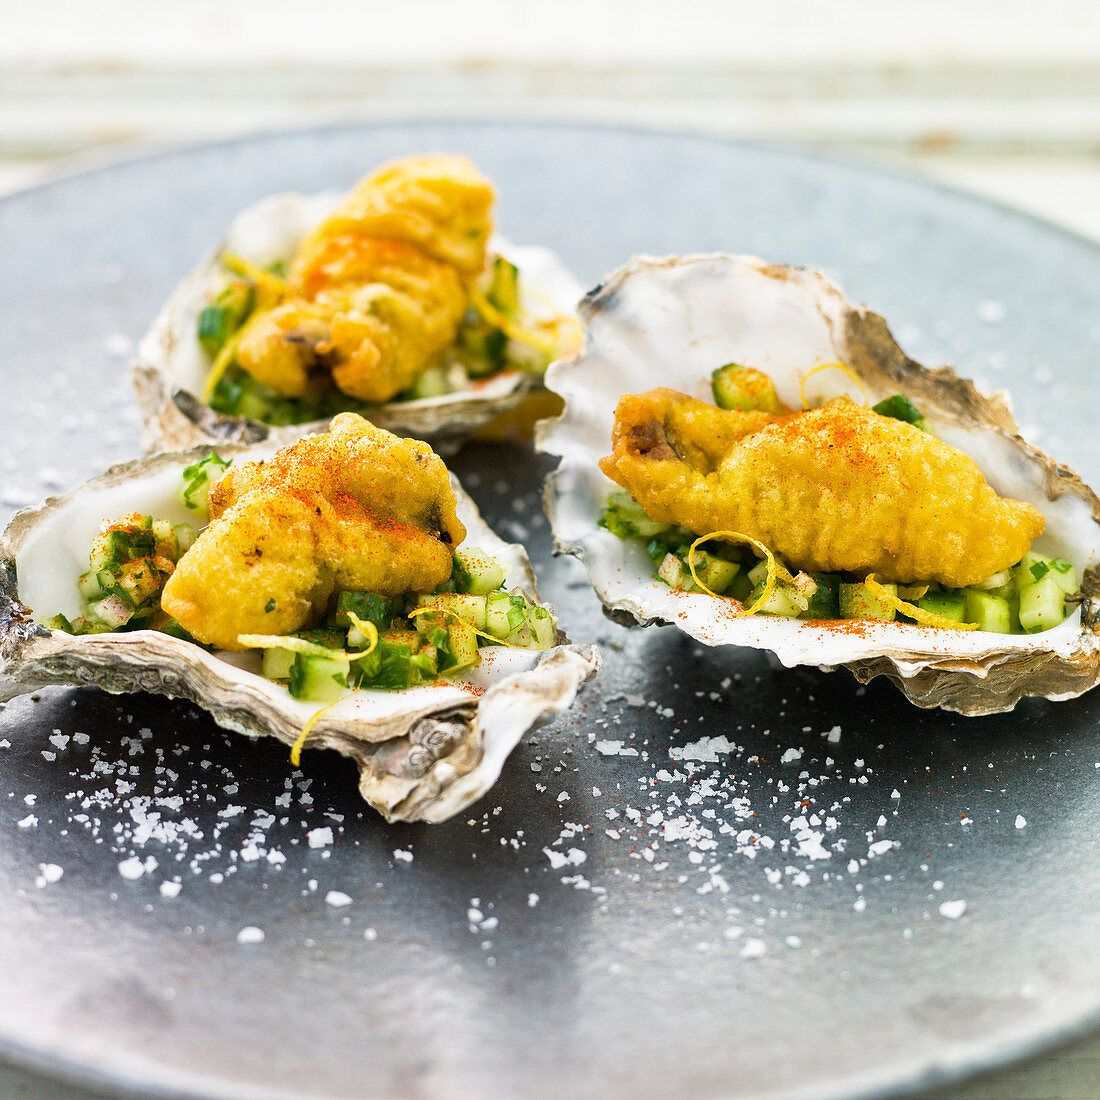 Battered Oysters on a bed of cucmber salad, served in oyster shells with a sprinkling of chilli powder, lemon zest and rock salt